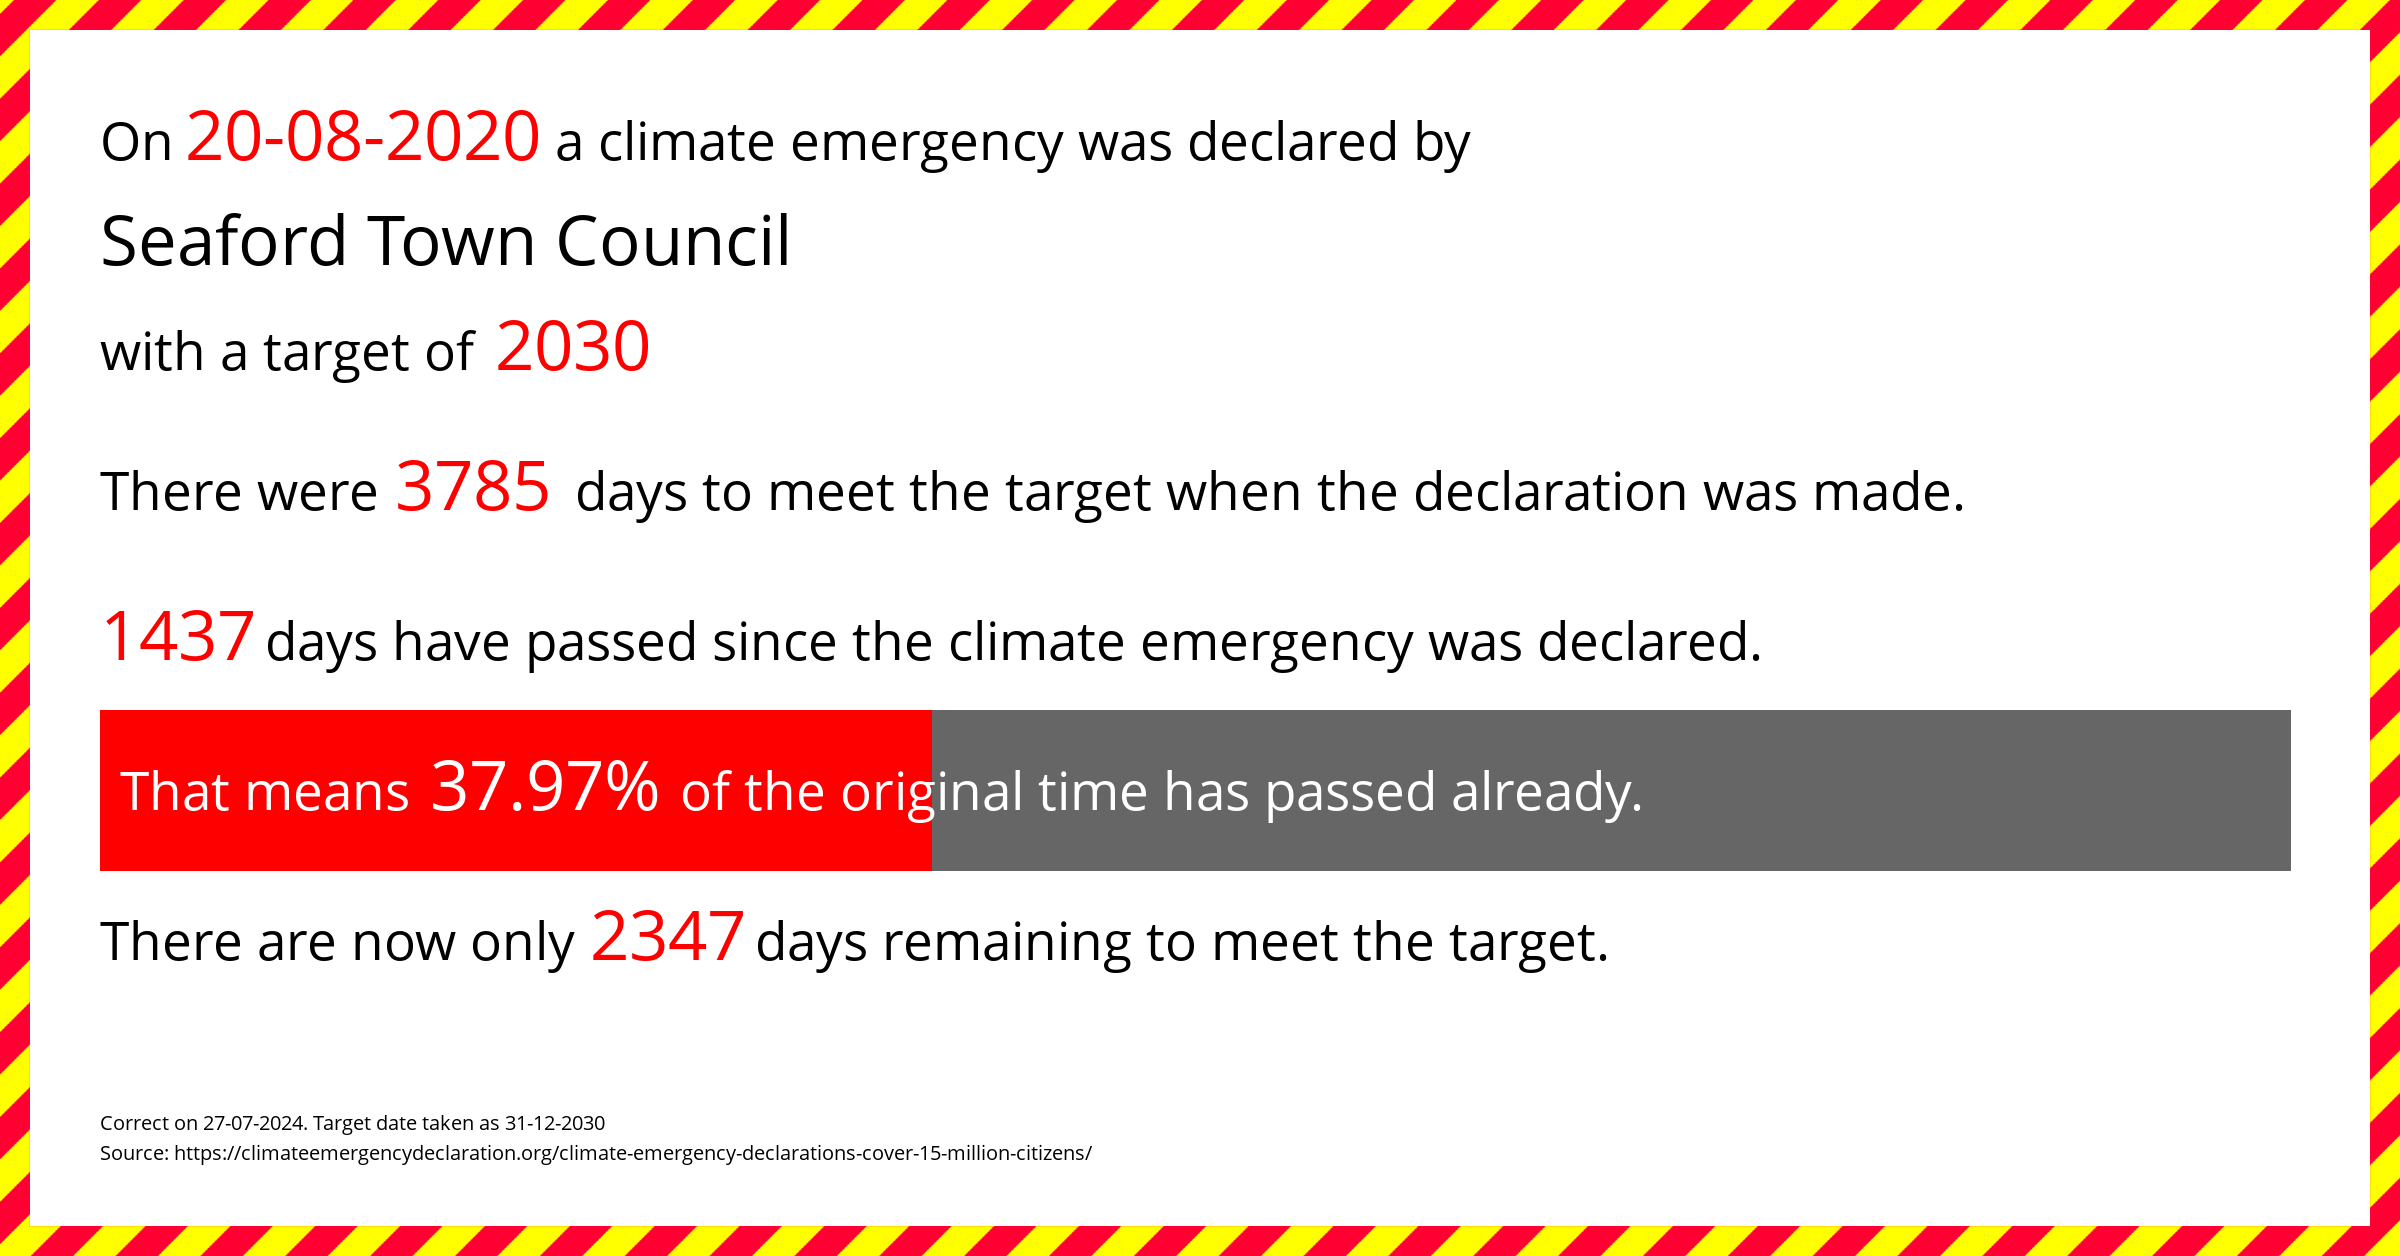 Seaford Town Council  declared a Climate emergency on Thursday 20th August 2020, with a target of 2030.